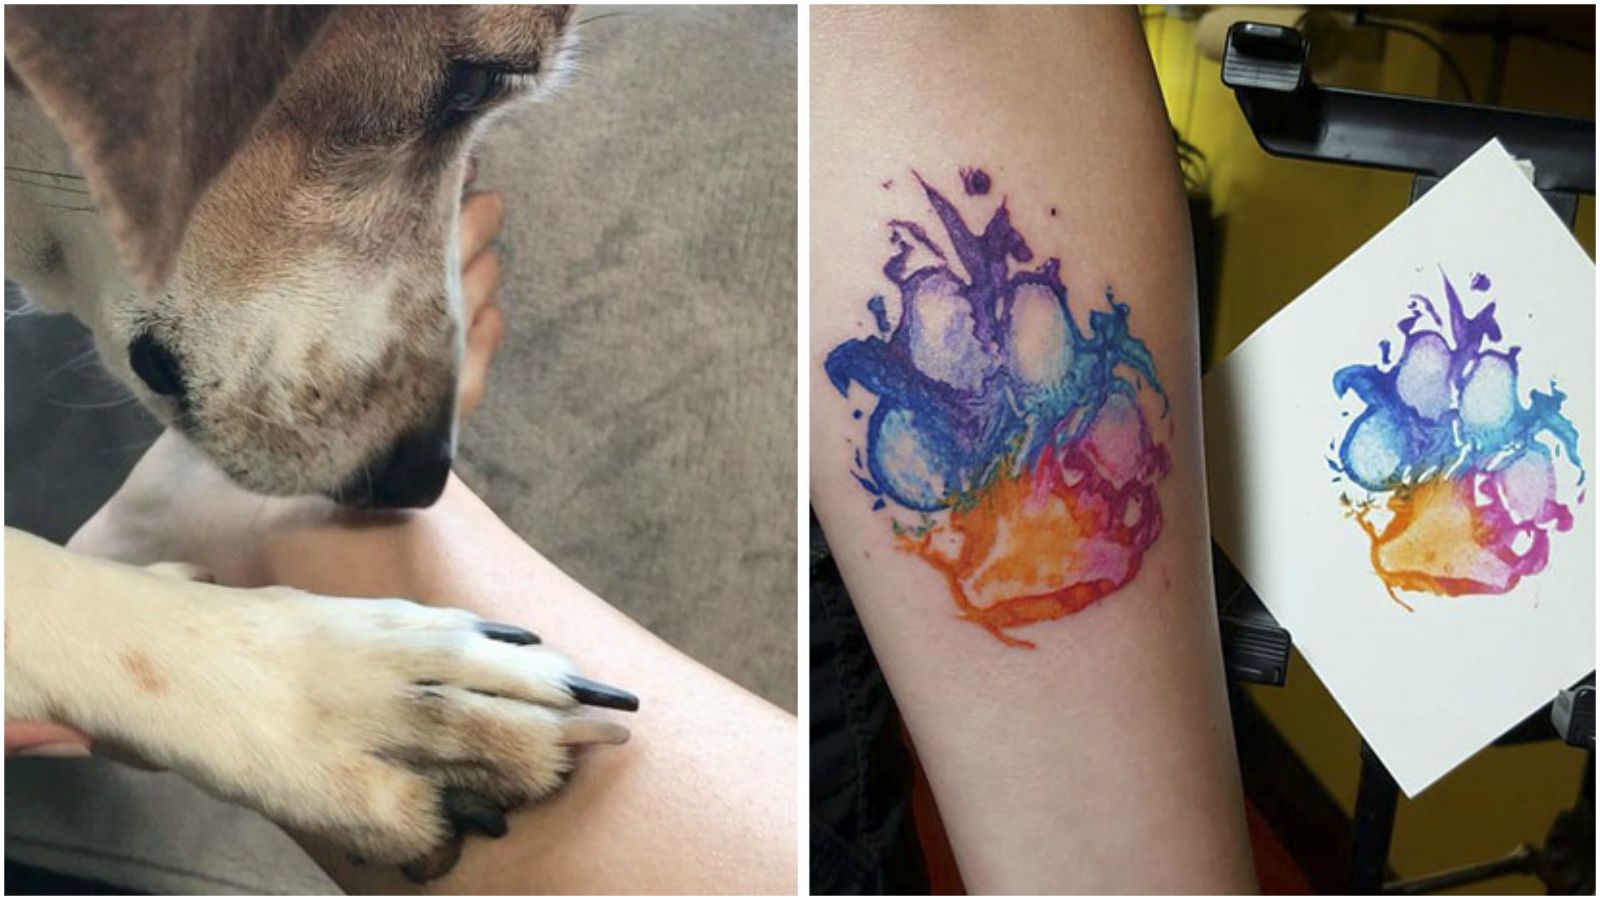 25 People with Tattoos of Their Dog’s Paw. It’s a Beautiful Way of Expressing Their Special Bond…